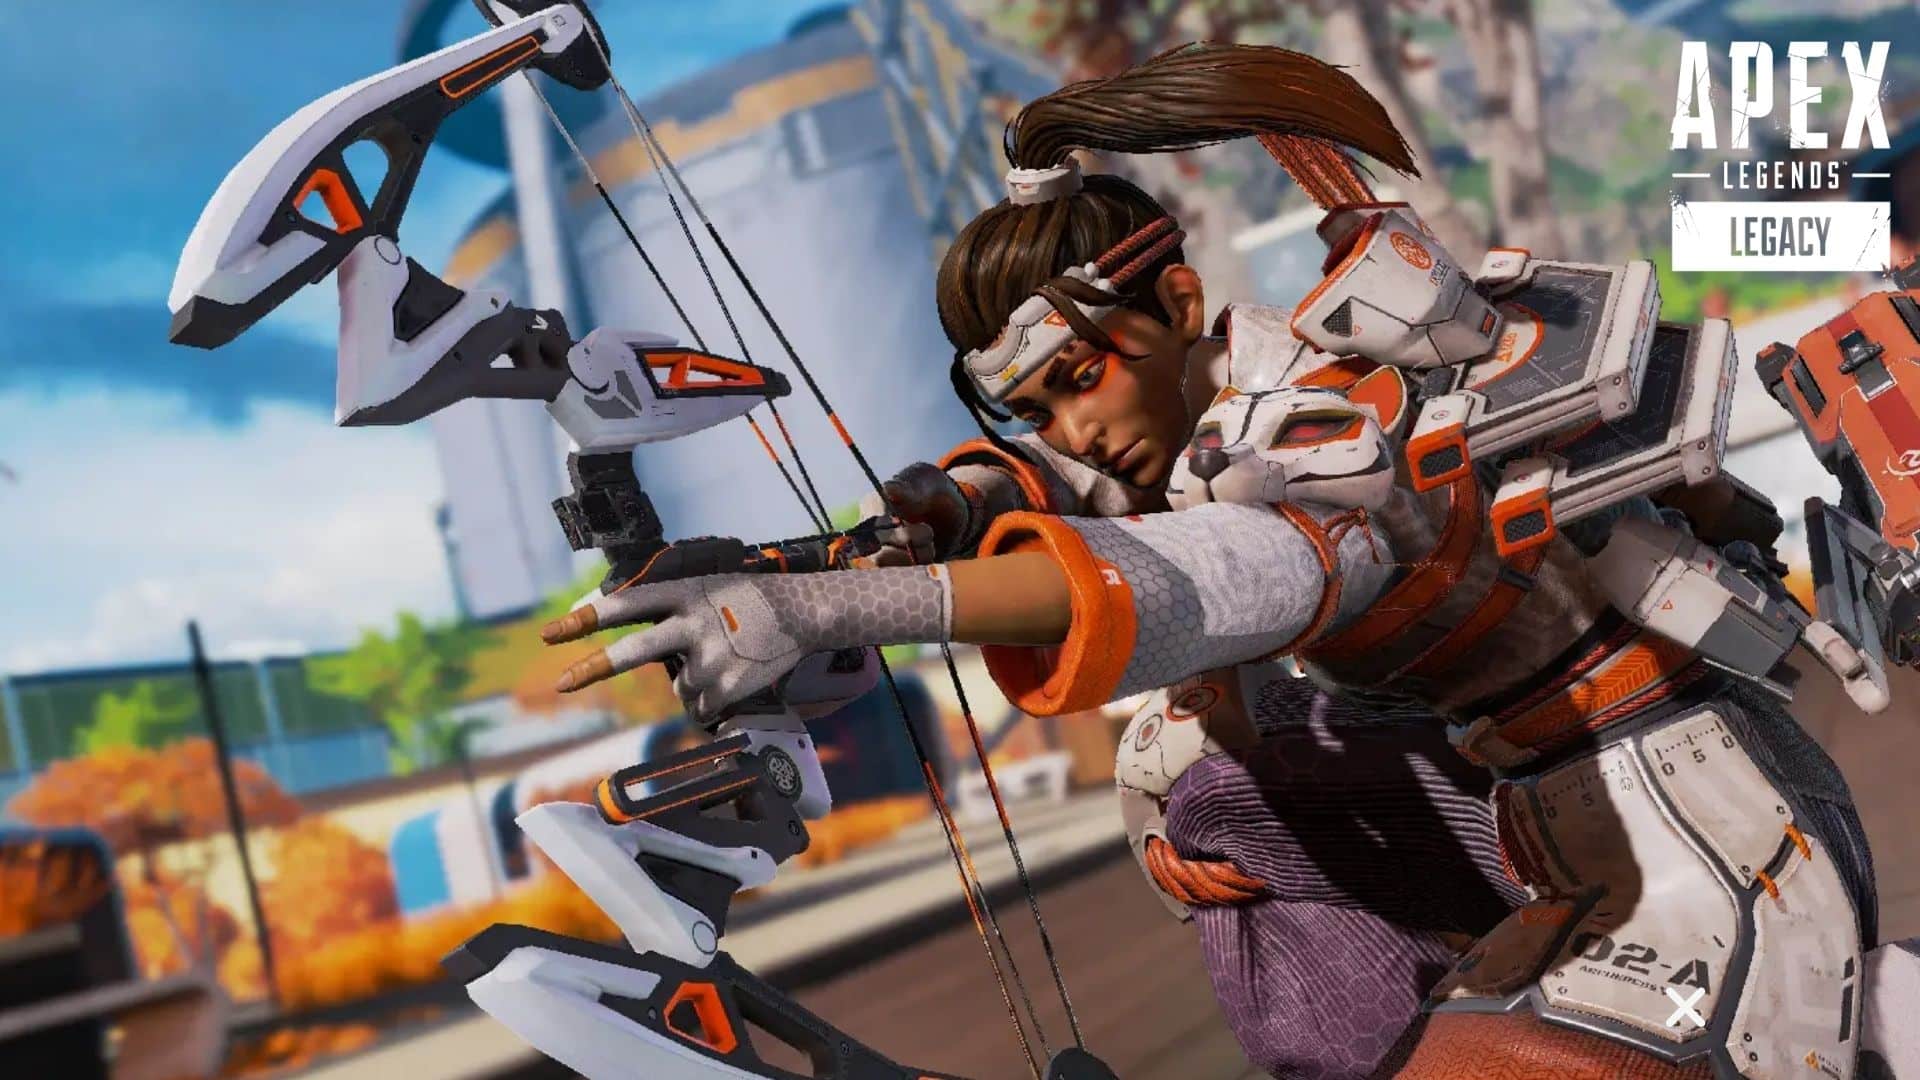 Apex Legends characters using Bocek Bow